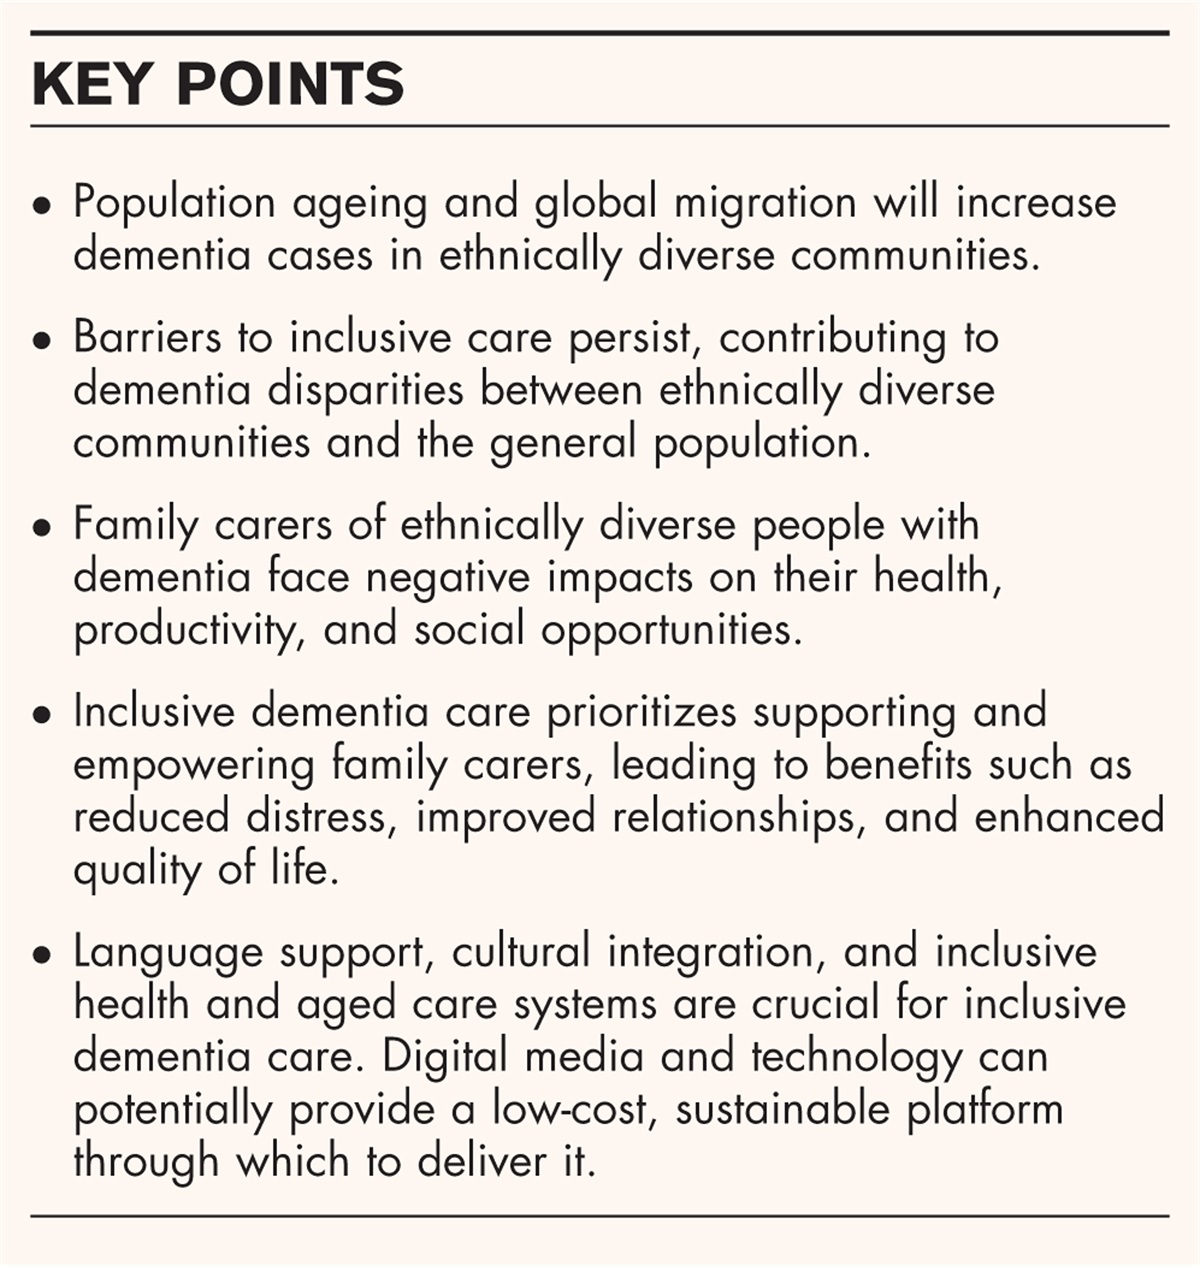 Inclusive dementia care for ethnically diverse families